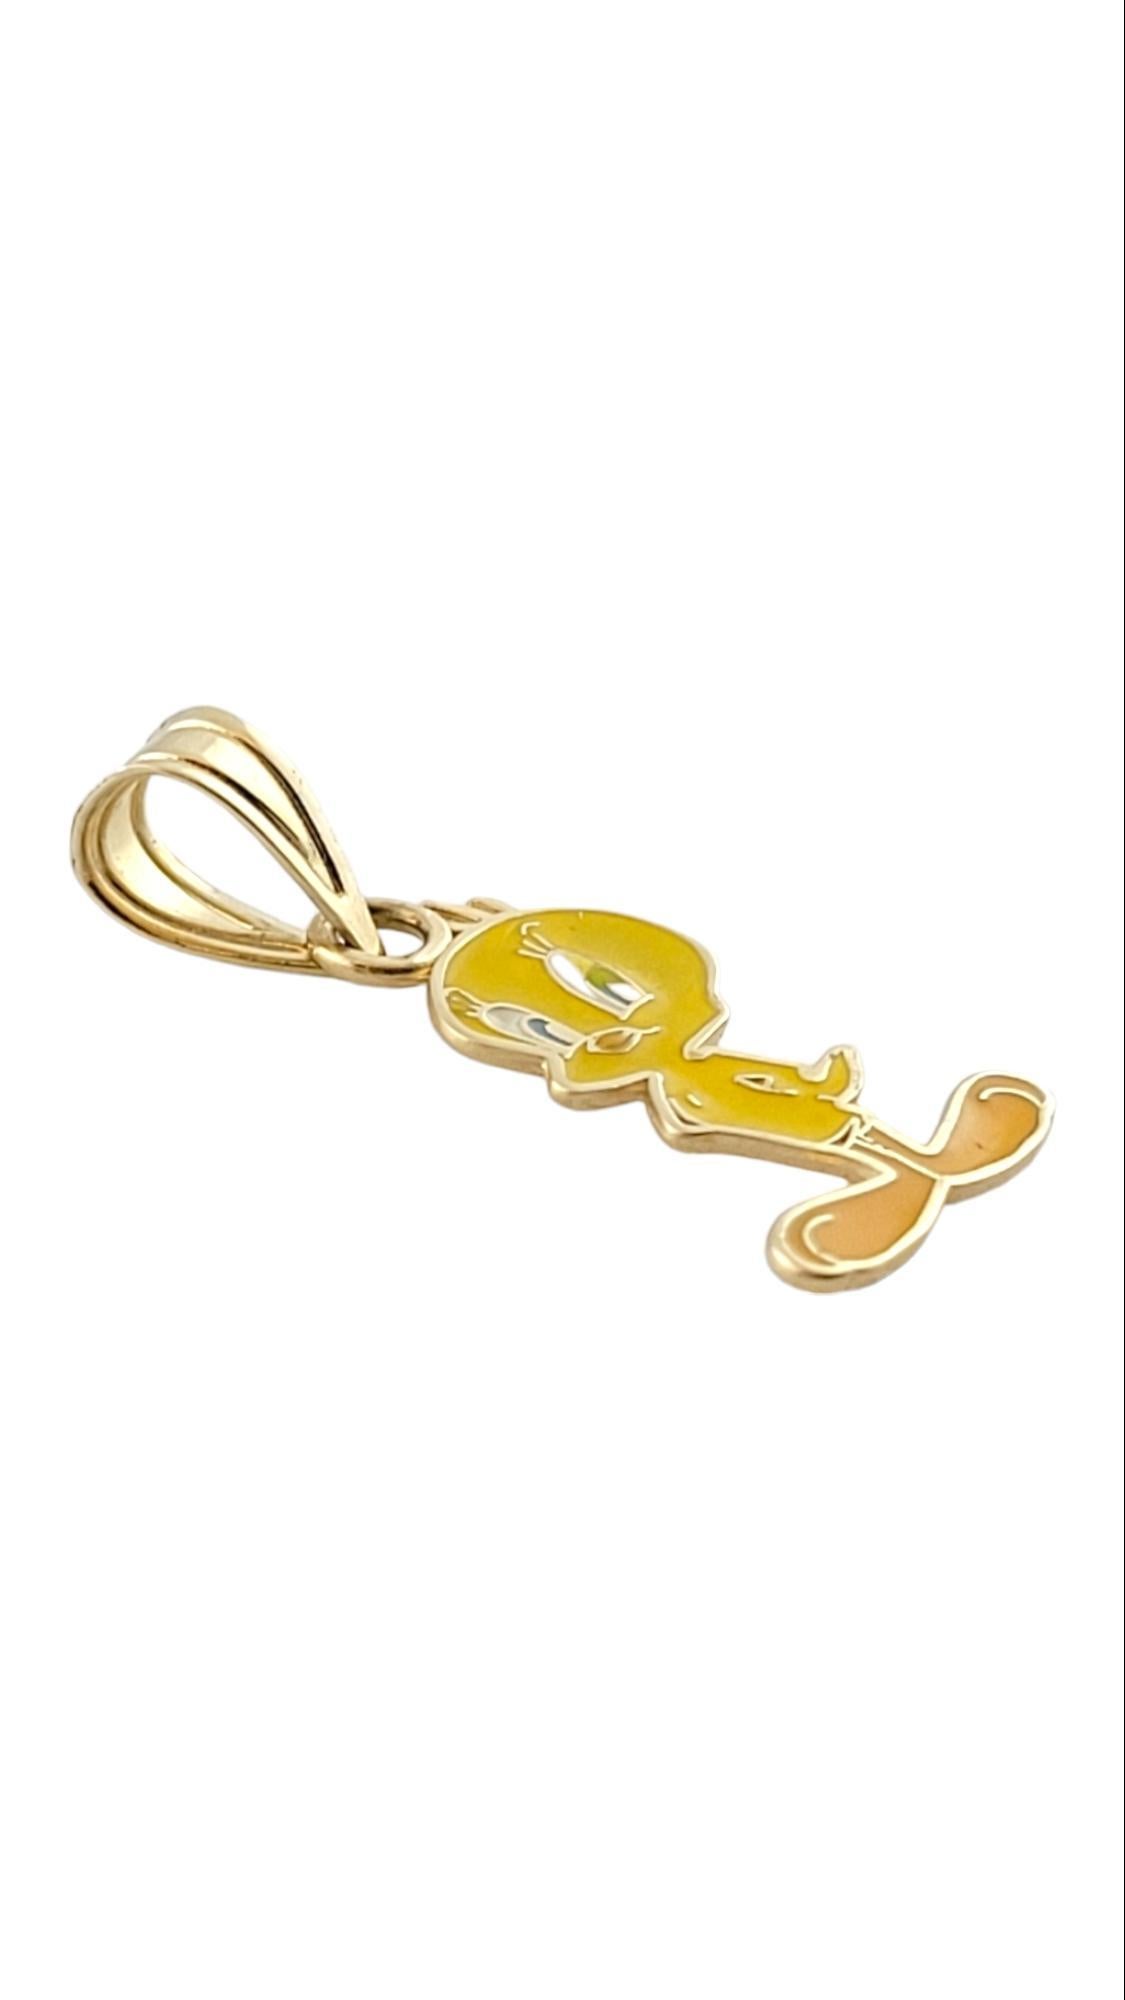 Vintage 14K Yellow Gold Enamel Tweety Bird Pendant - 

This loveable Tweety Bird pendant is crafted in beautifully detailed 14K yellow gold. 

Size: 14.4mm X 9.6mm 

Stamped: 14K 

Weight: 0.3g/0.1dwt

Very good condition, professionally